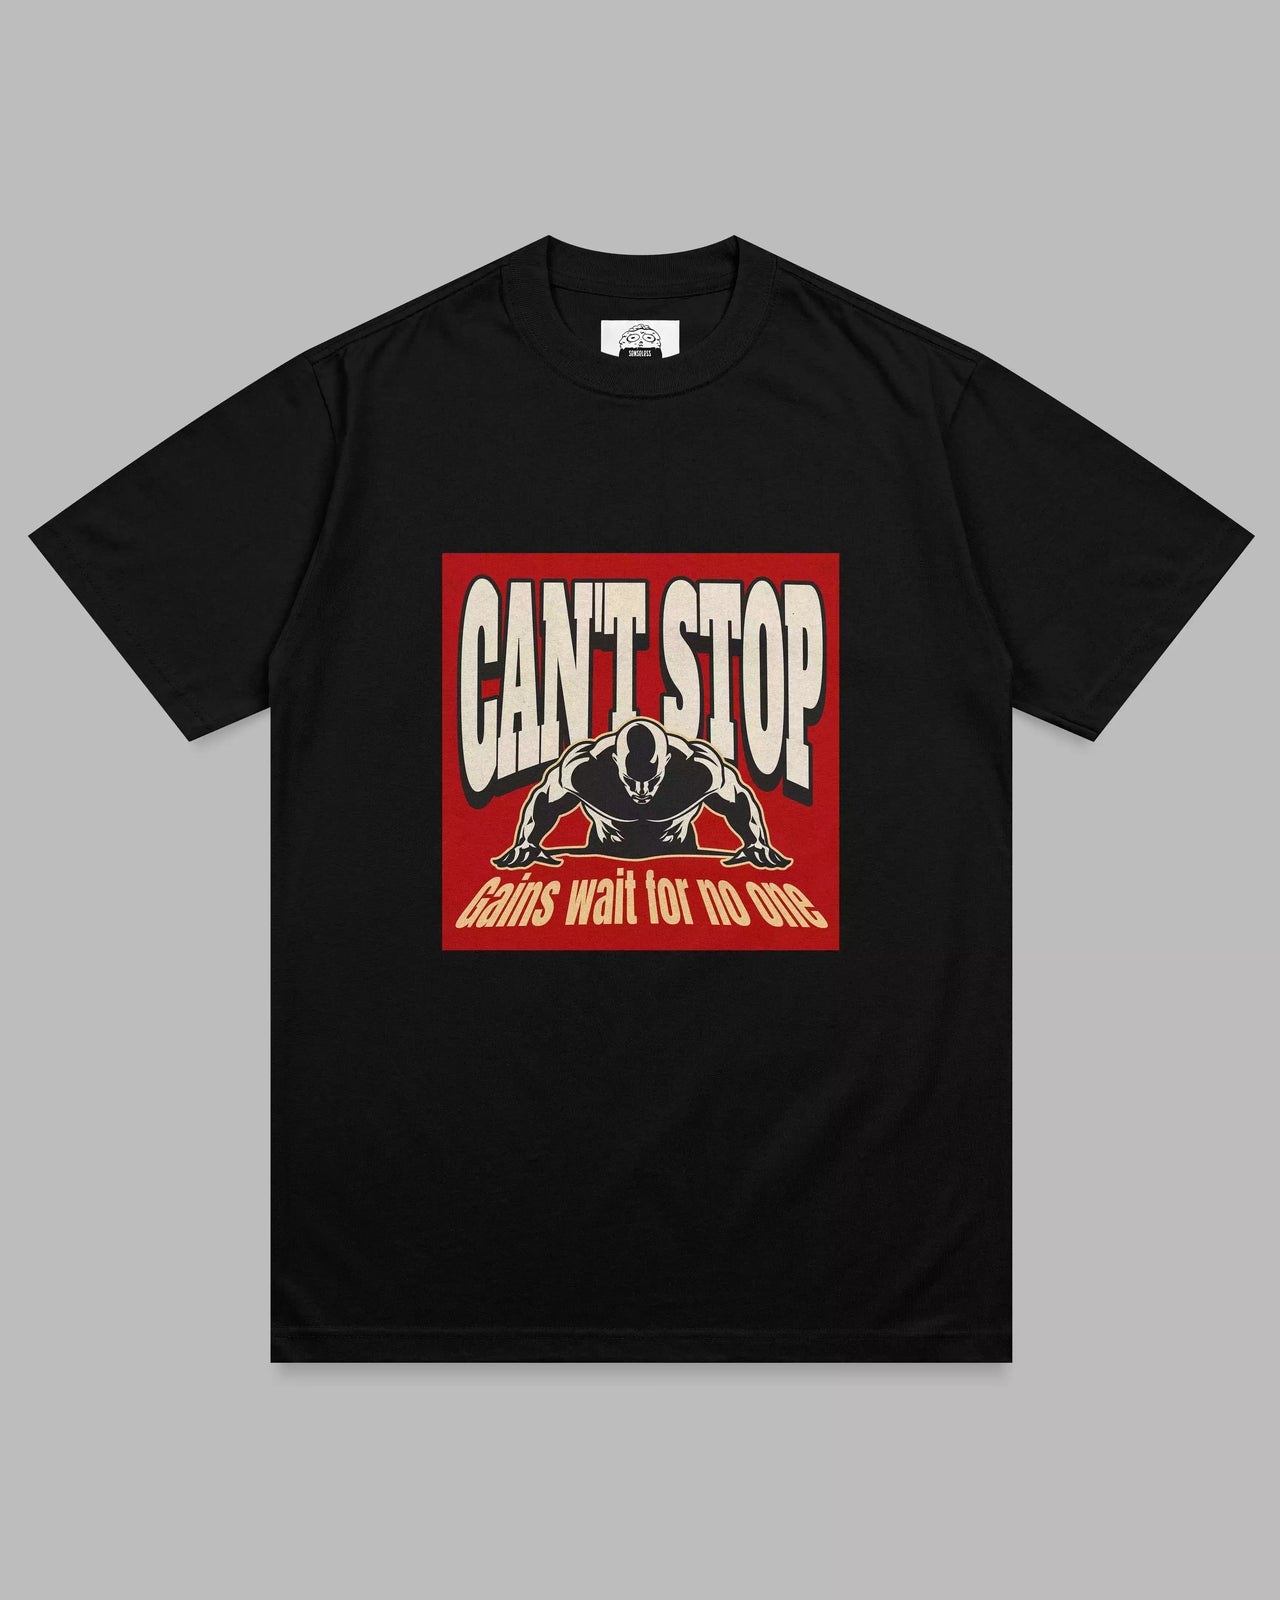 Can't Stop: Black Unisex Gym Tee